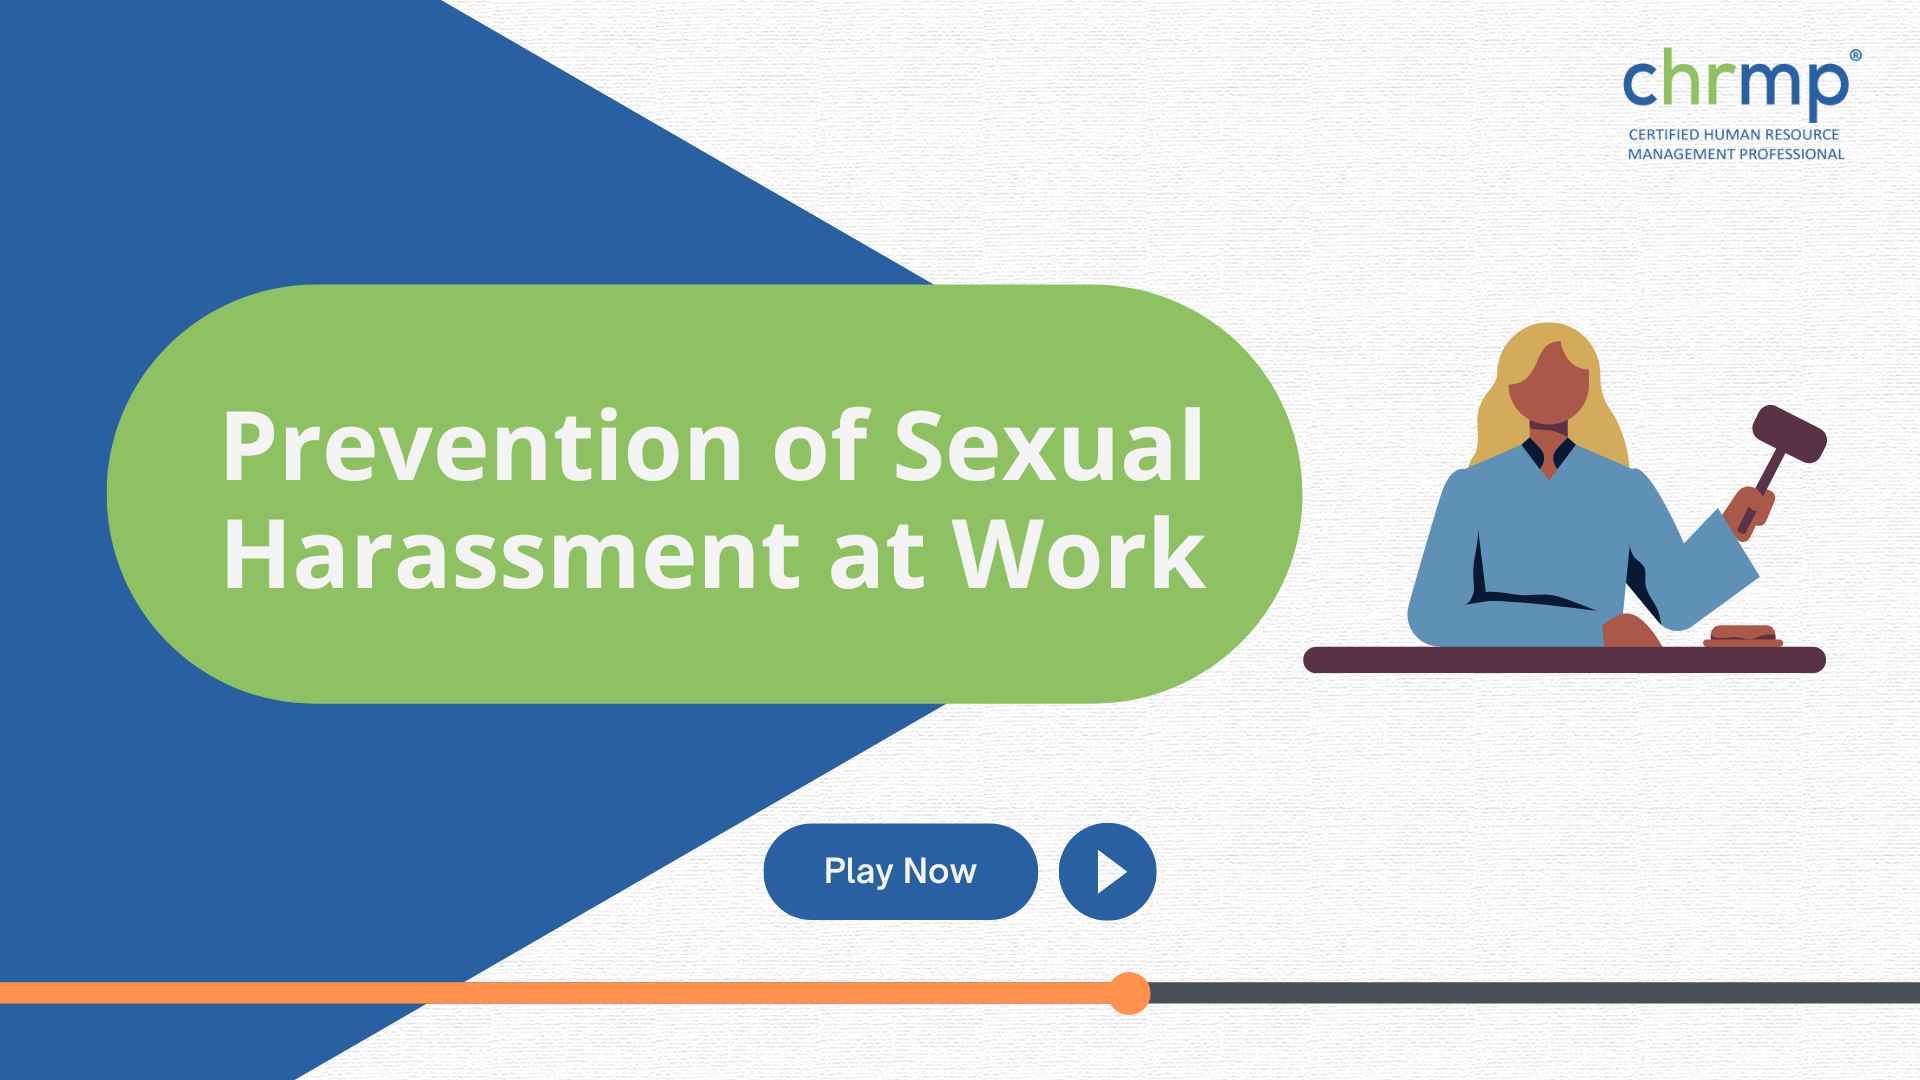 Prevention of Sexual Harassment at Work